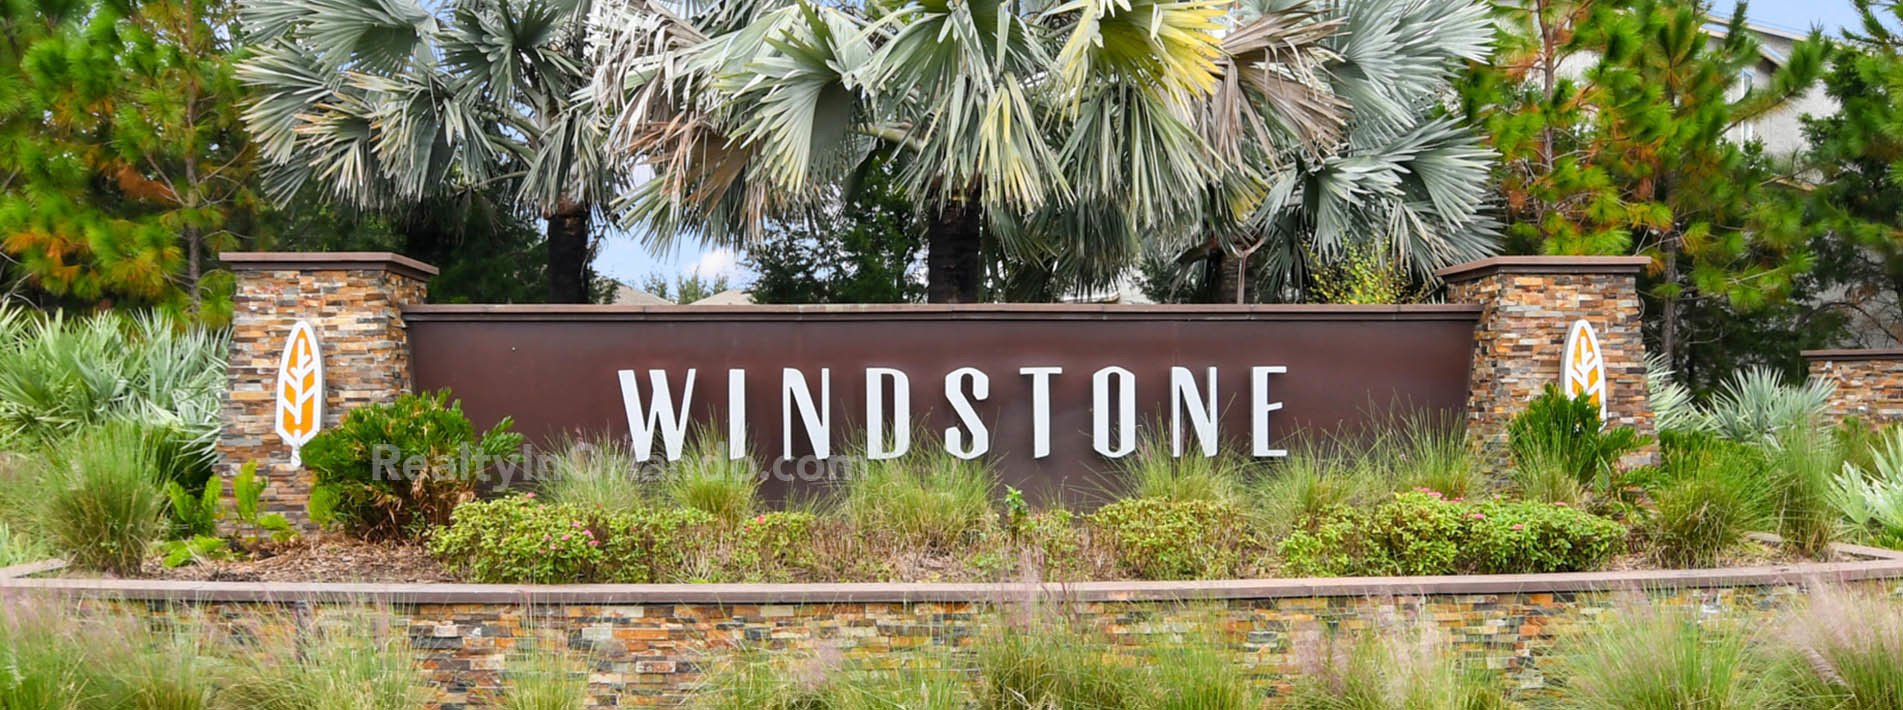 Windstone Windermere Homes for Sale